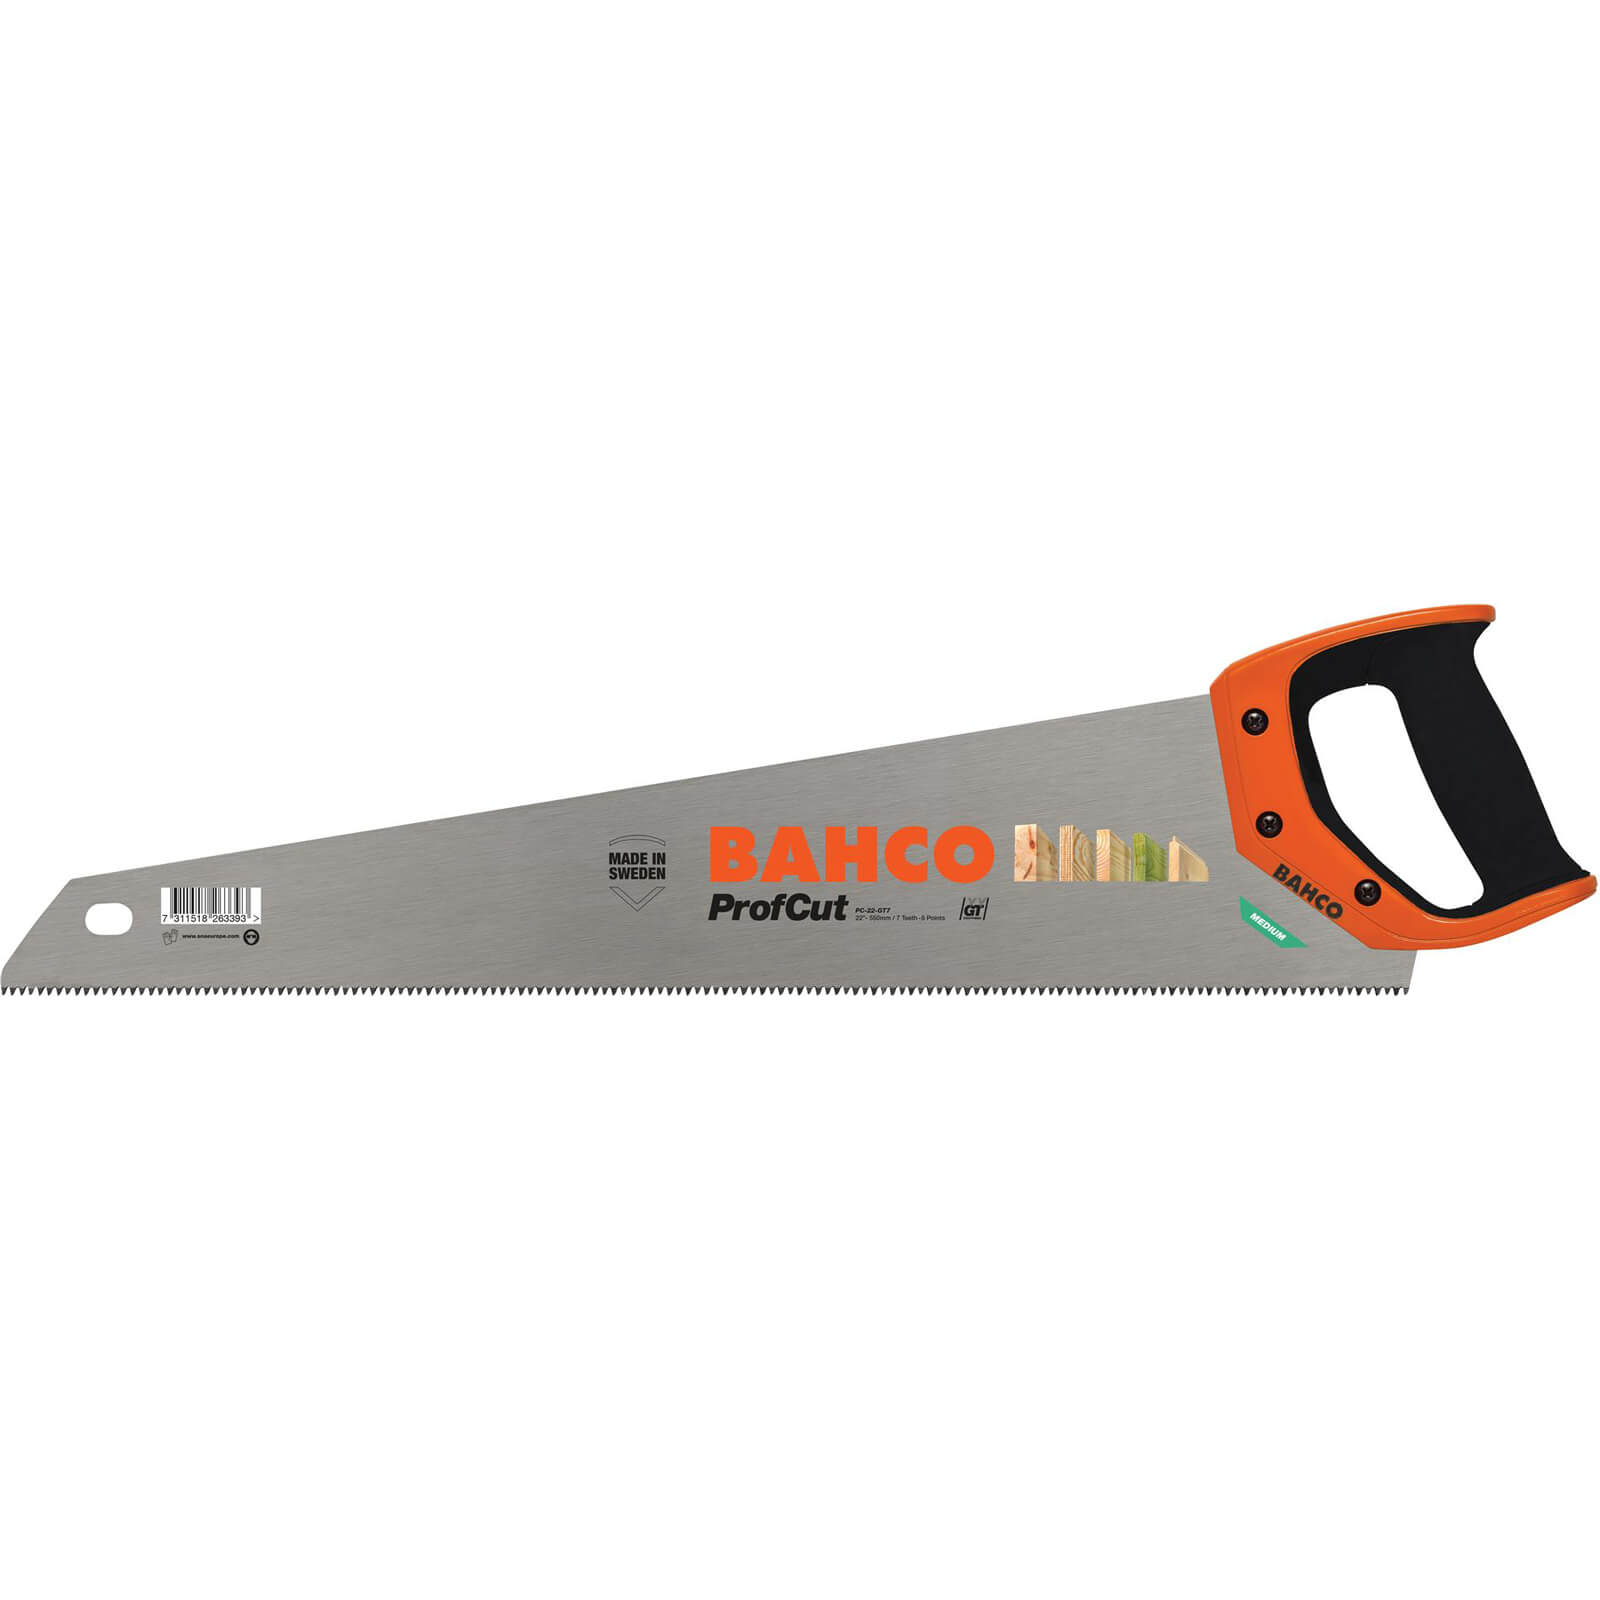 Image of Bahco ProfCut Hand Saw 22" / 550mm 7tpi